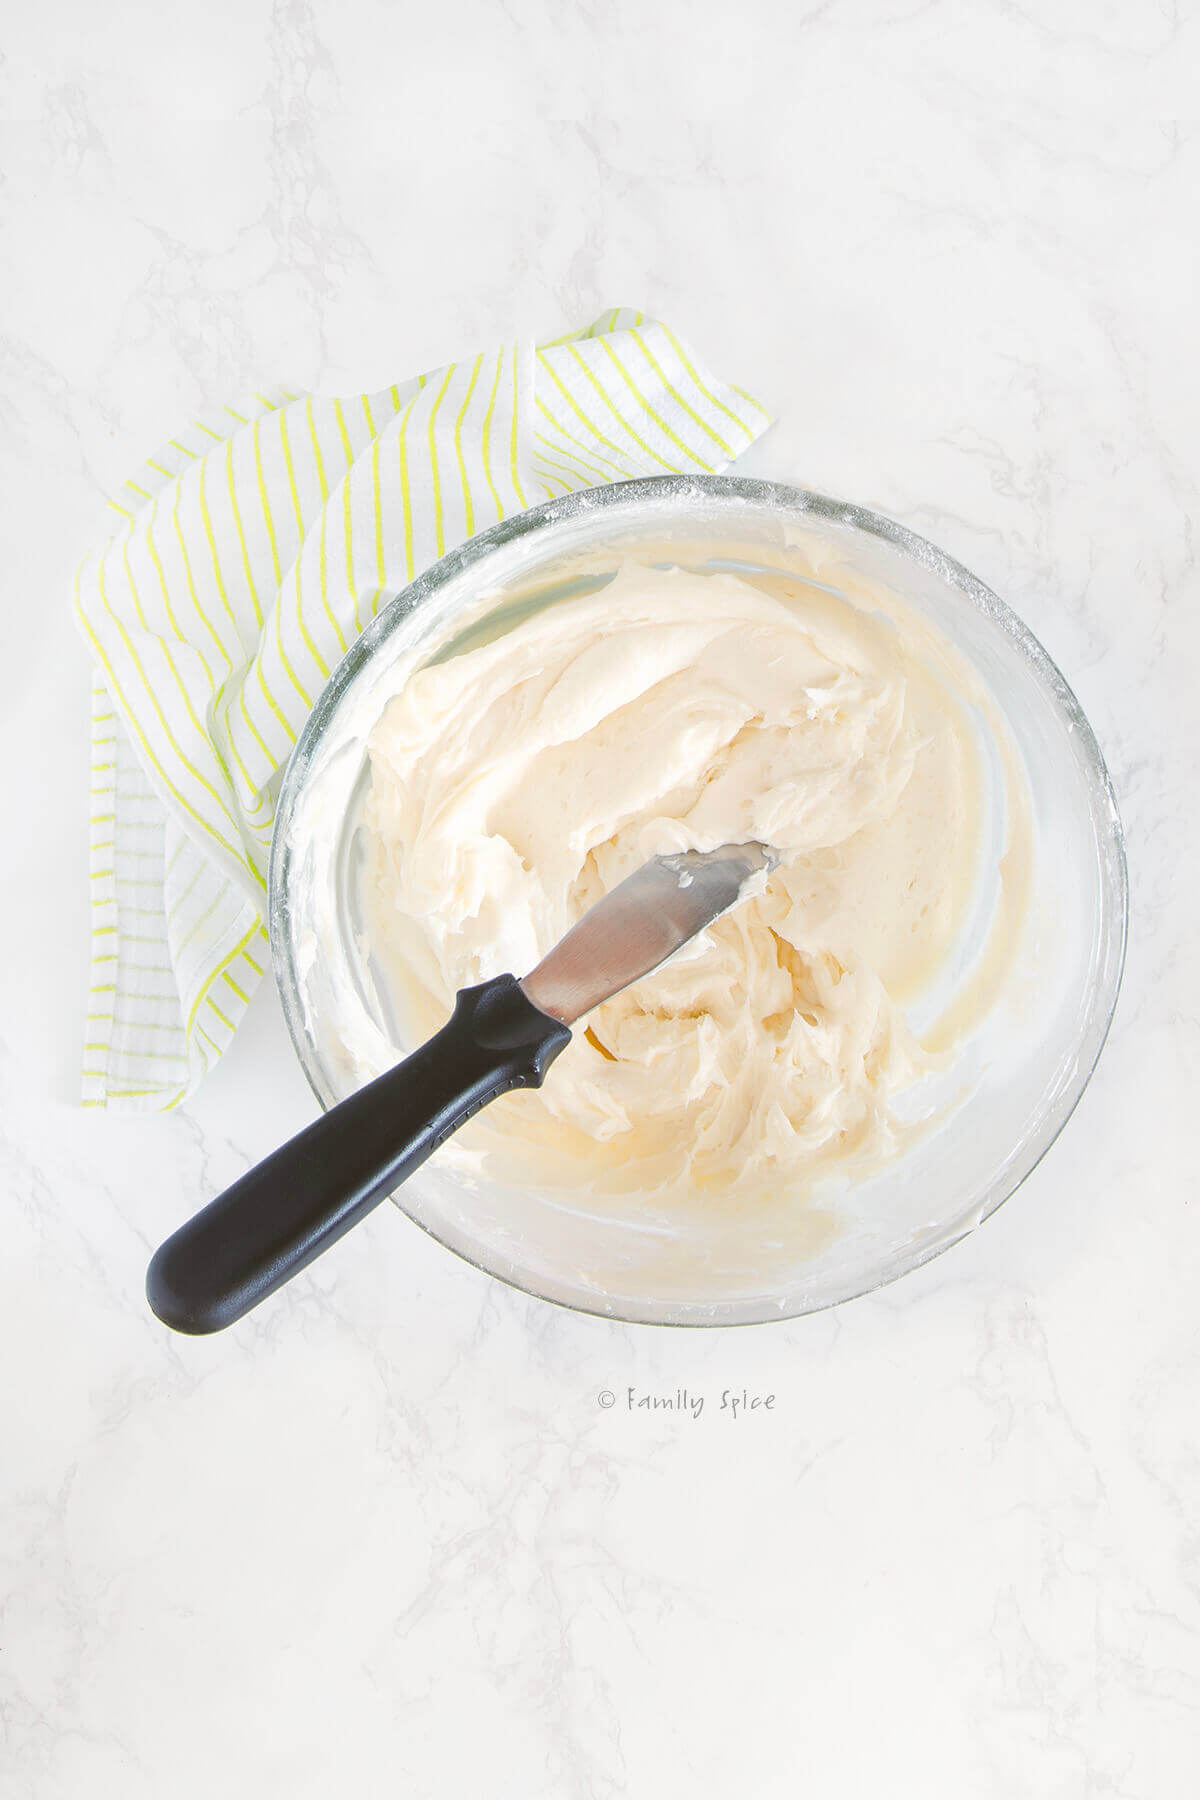 A glass mixing bowl with cream cheese frosting and a metal spreader